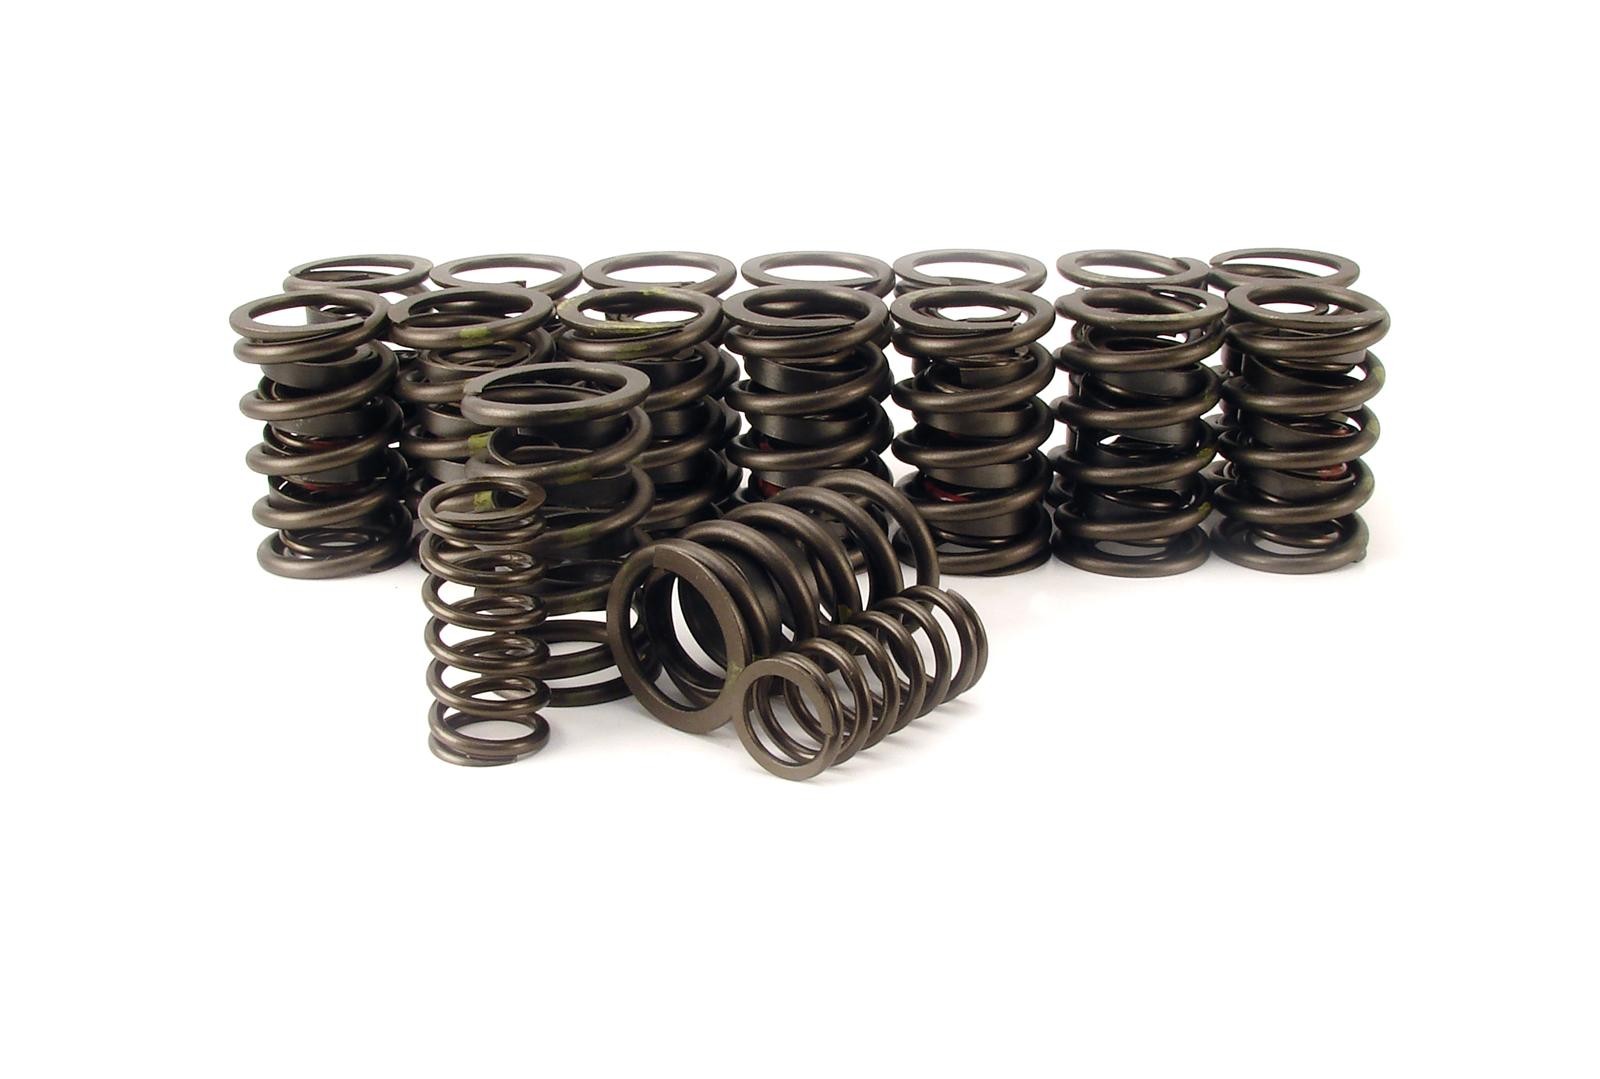 COMP Cams Valve Spring, Dual, 1.509 in. O.D., 566 lbs./in. Rate, 1.050 in. Coil Bind Height, Set of 16 : suit Big Block with Hydraulic cams over 510th lift